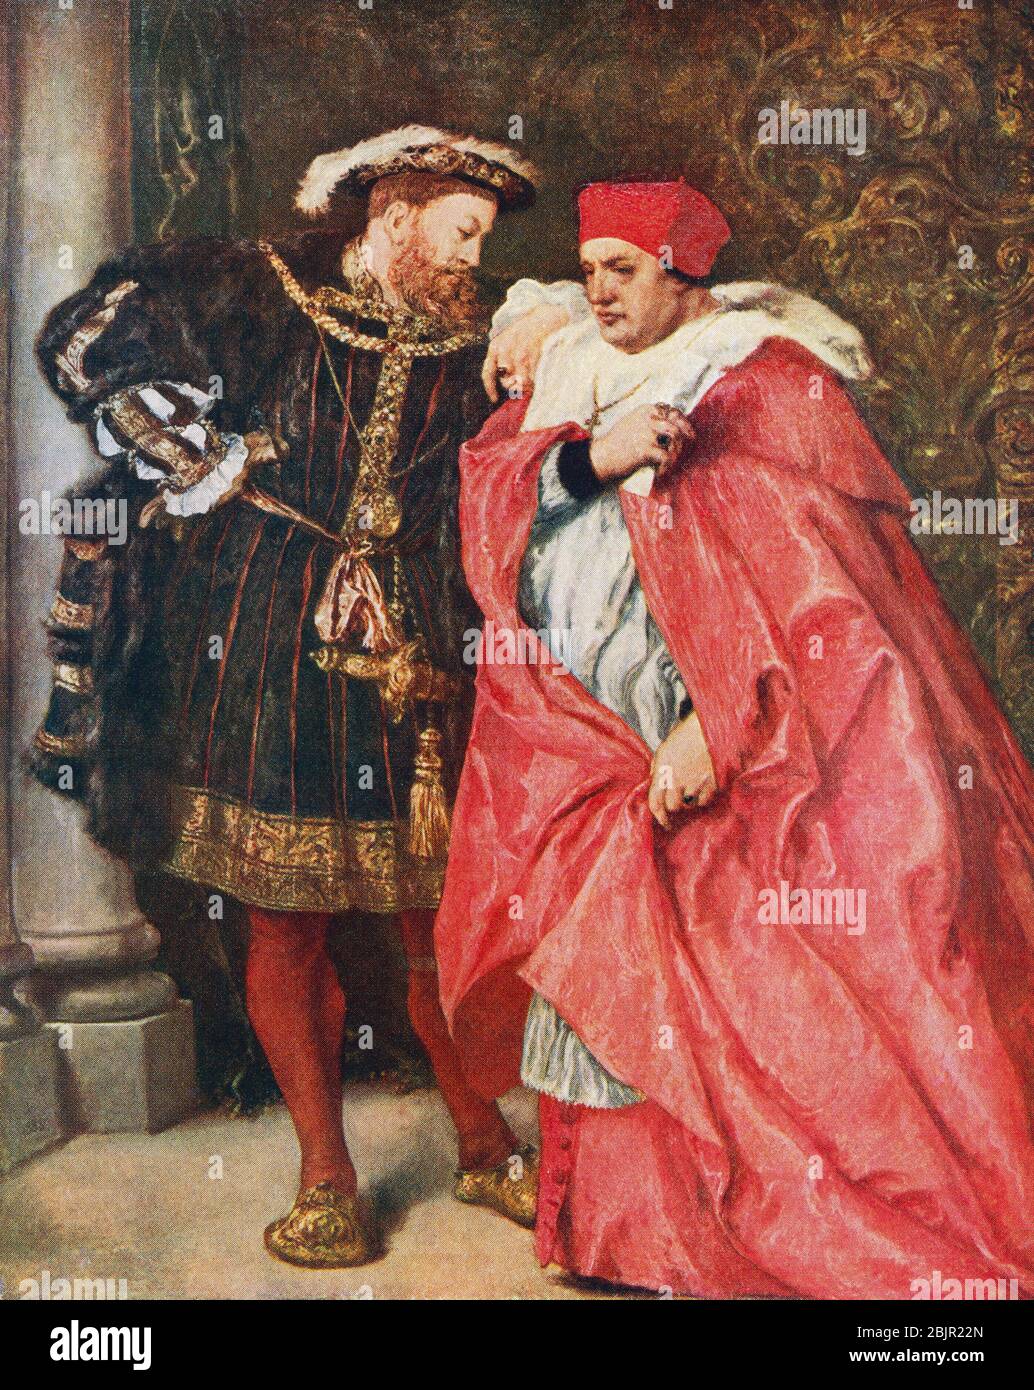 Ego Et Rex Meus, after the painting by Sir John Gilbert.  Henry VIII and Thomas Wolsey. Henry VIII, 1491 – 1547.  King of England.  Thomas Wolsey, c. 1473 –1530.  English archbishop, statesman and a cardinal of the Catholic Church.  From Britain and Her Neighbours, 1485 - 1688, published 1923. Stock Photo